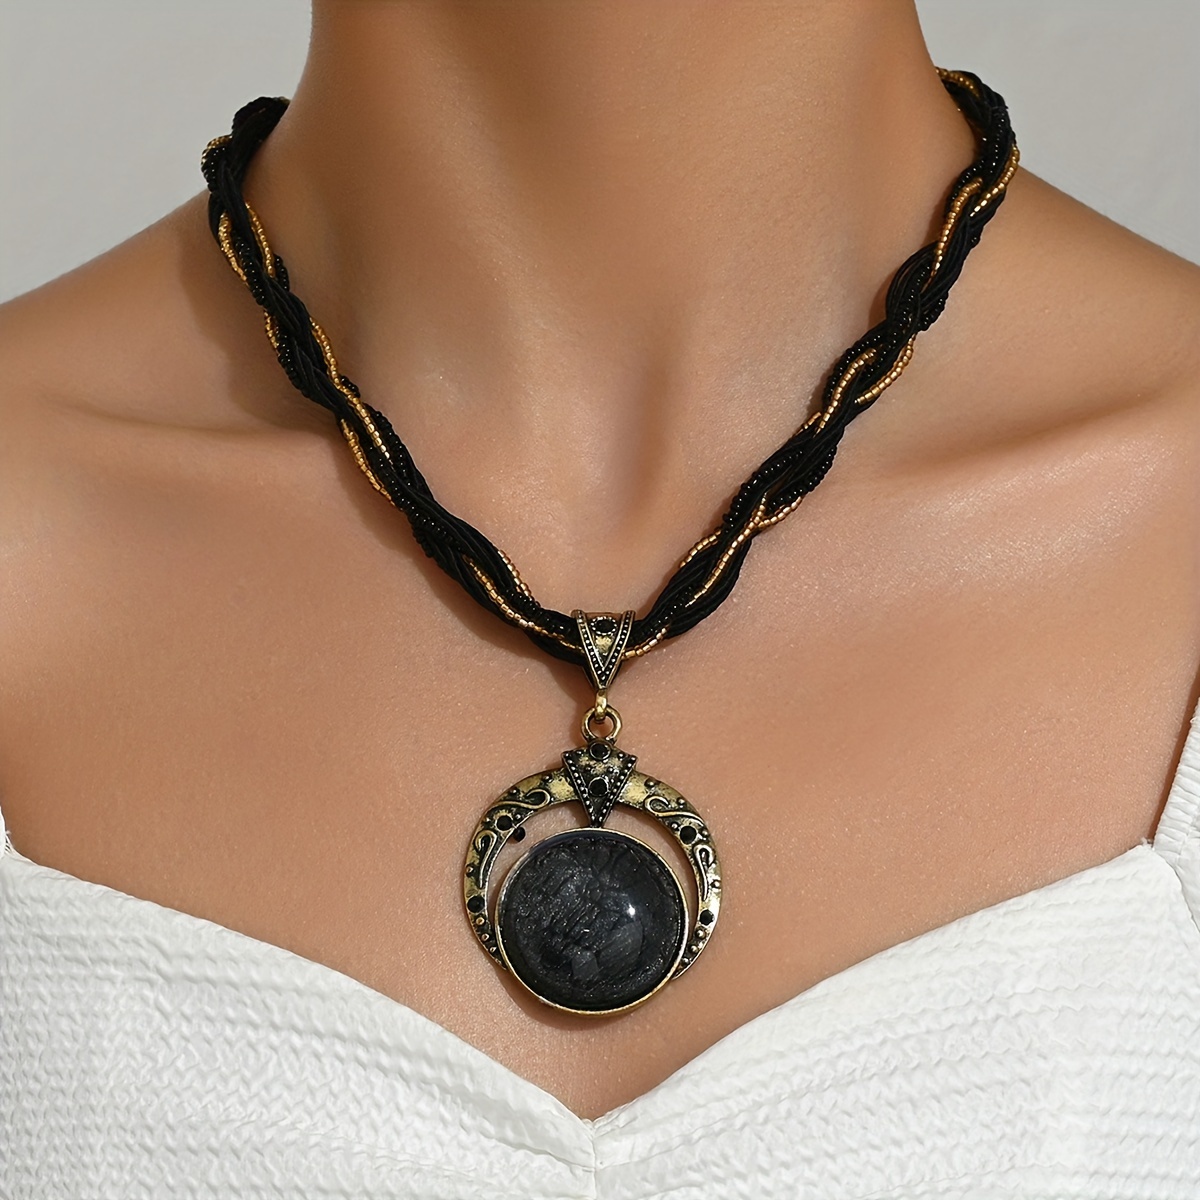 

Vintage Style Elegant Moon Necklace With Starry Sky Black Resin, Multilayer Beaded Chain, Luxurious Women's Jewelry For Holidays, Banquets, And Balls, Retro, Elegant